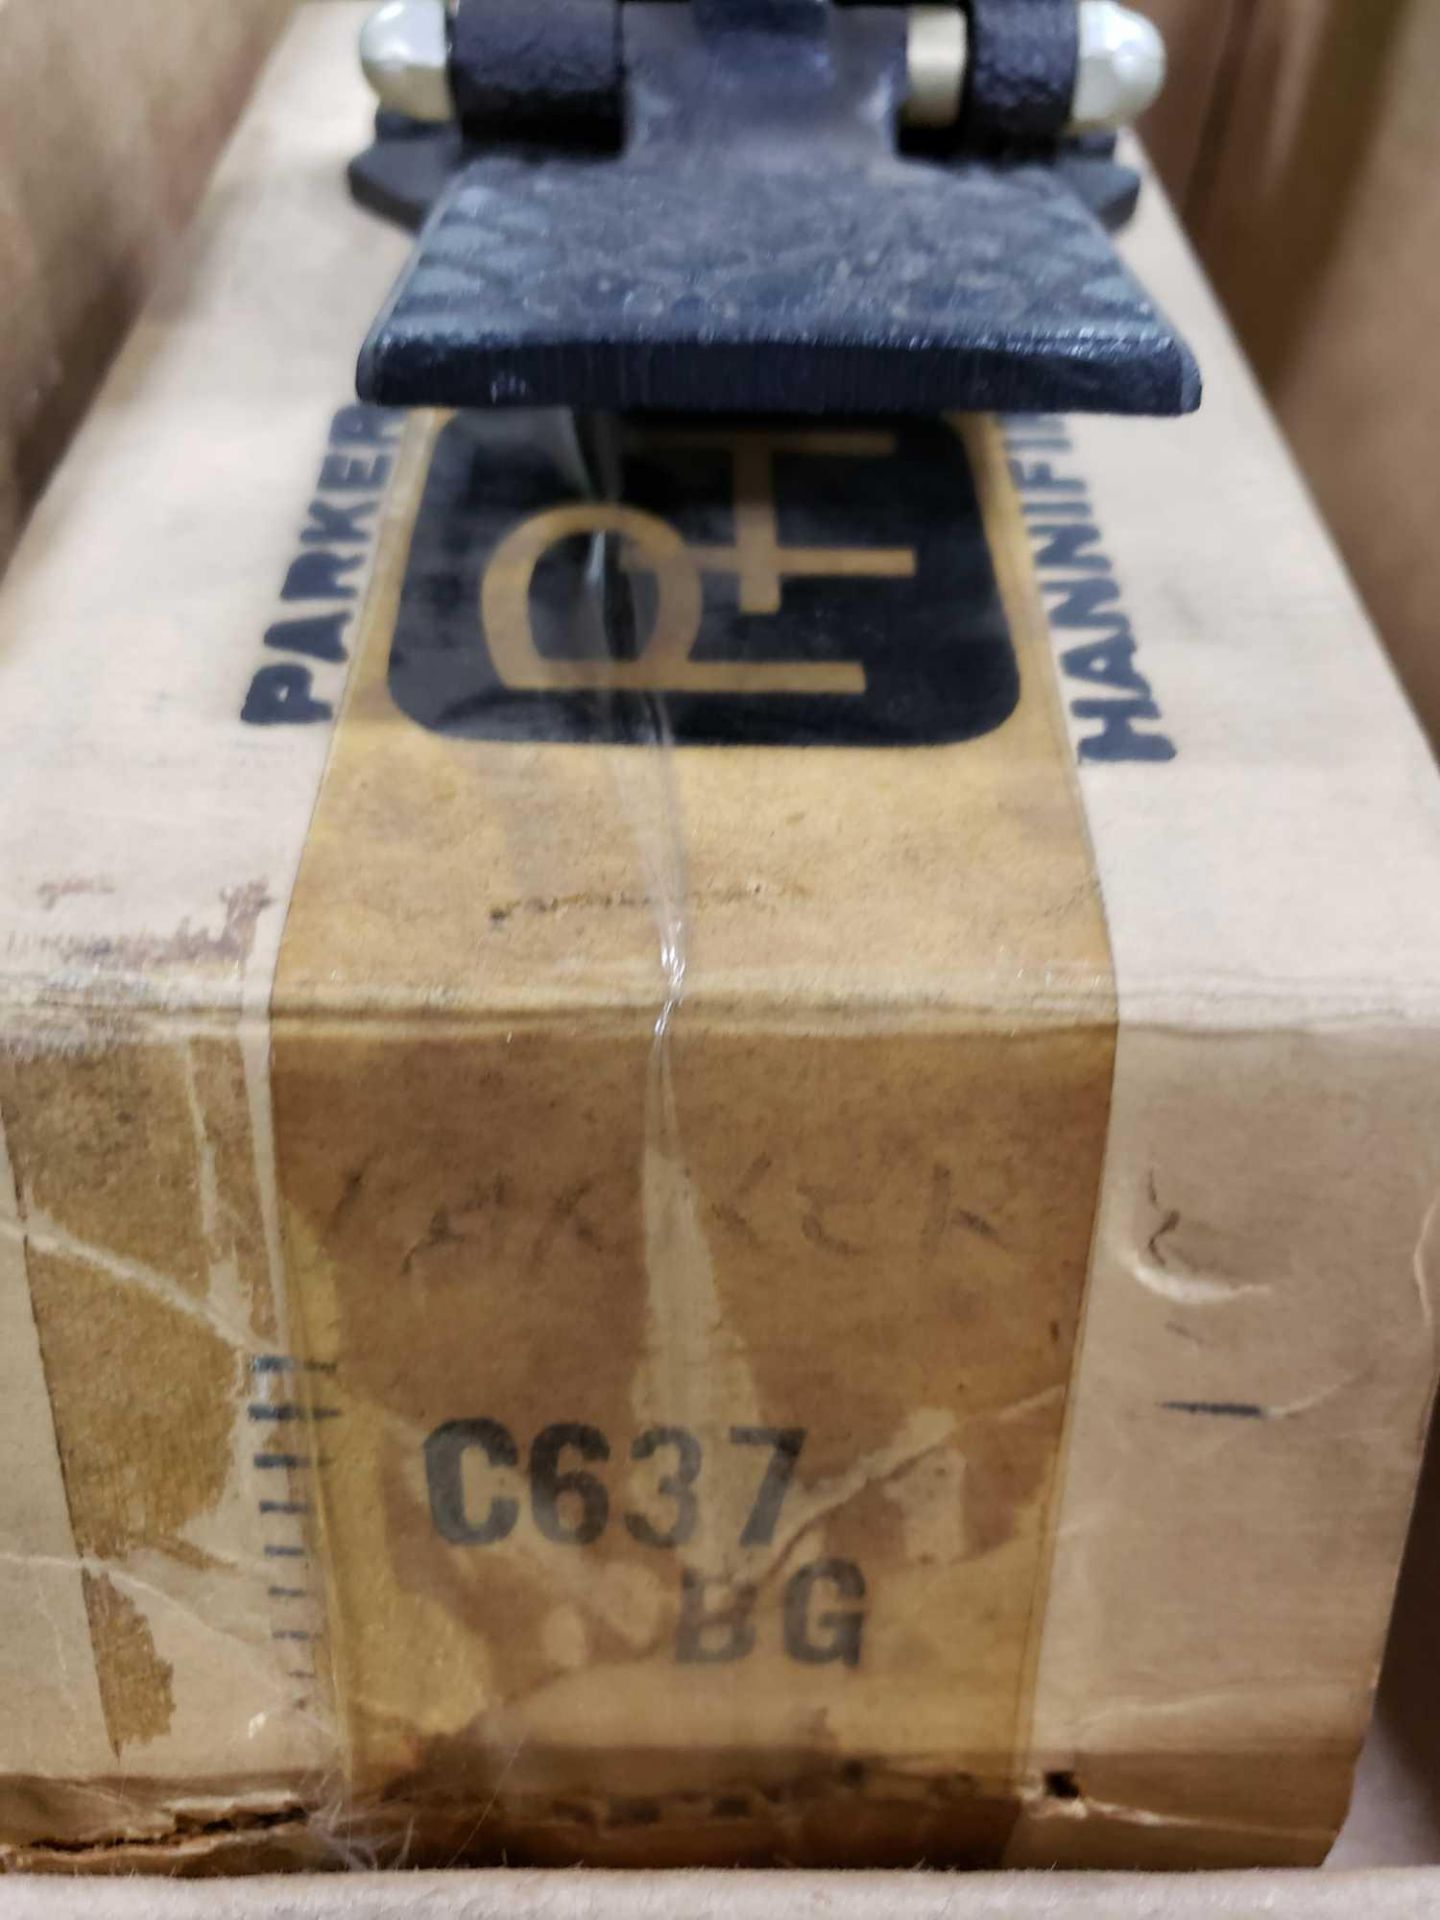 Parker Hannifin model C637-BG foot switch. New in box. - Image 2 of 3